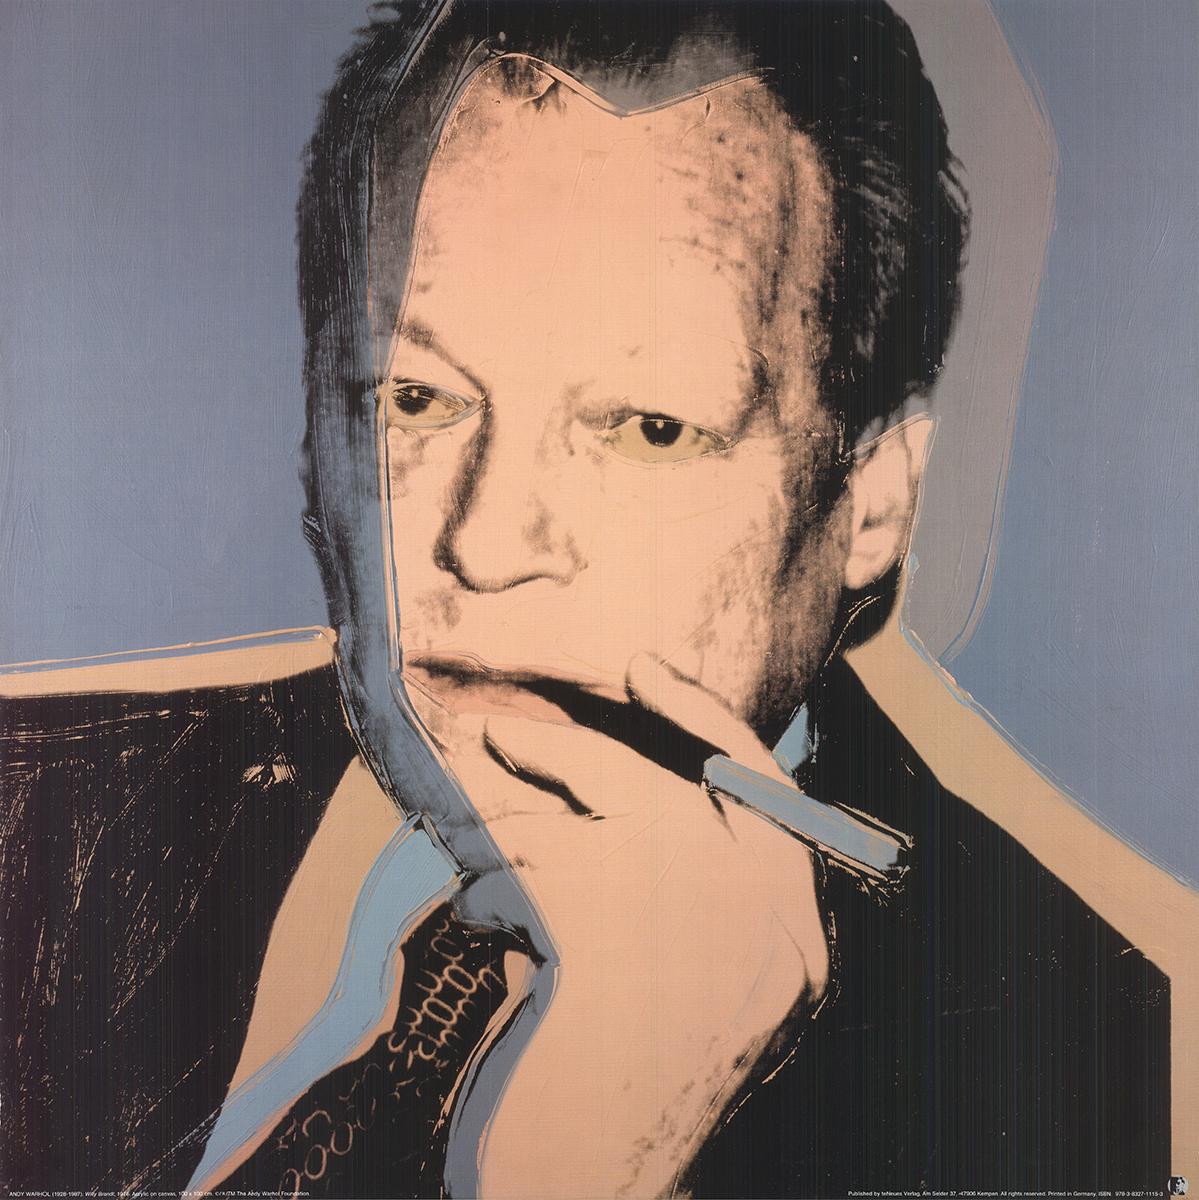 Paper Size: 27.5 x 27.5 inches ( 69.85 x 69.85 cm )
Image Size: 27.5 x 27.5 inches ( 69.85 x 69.85 cm )
Framed: No
Condition: A: Mint

Additional Details: Reproduction of Warhol’s Willy Brandt published by Te Neues Publications in 1993.